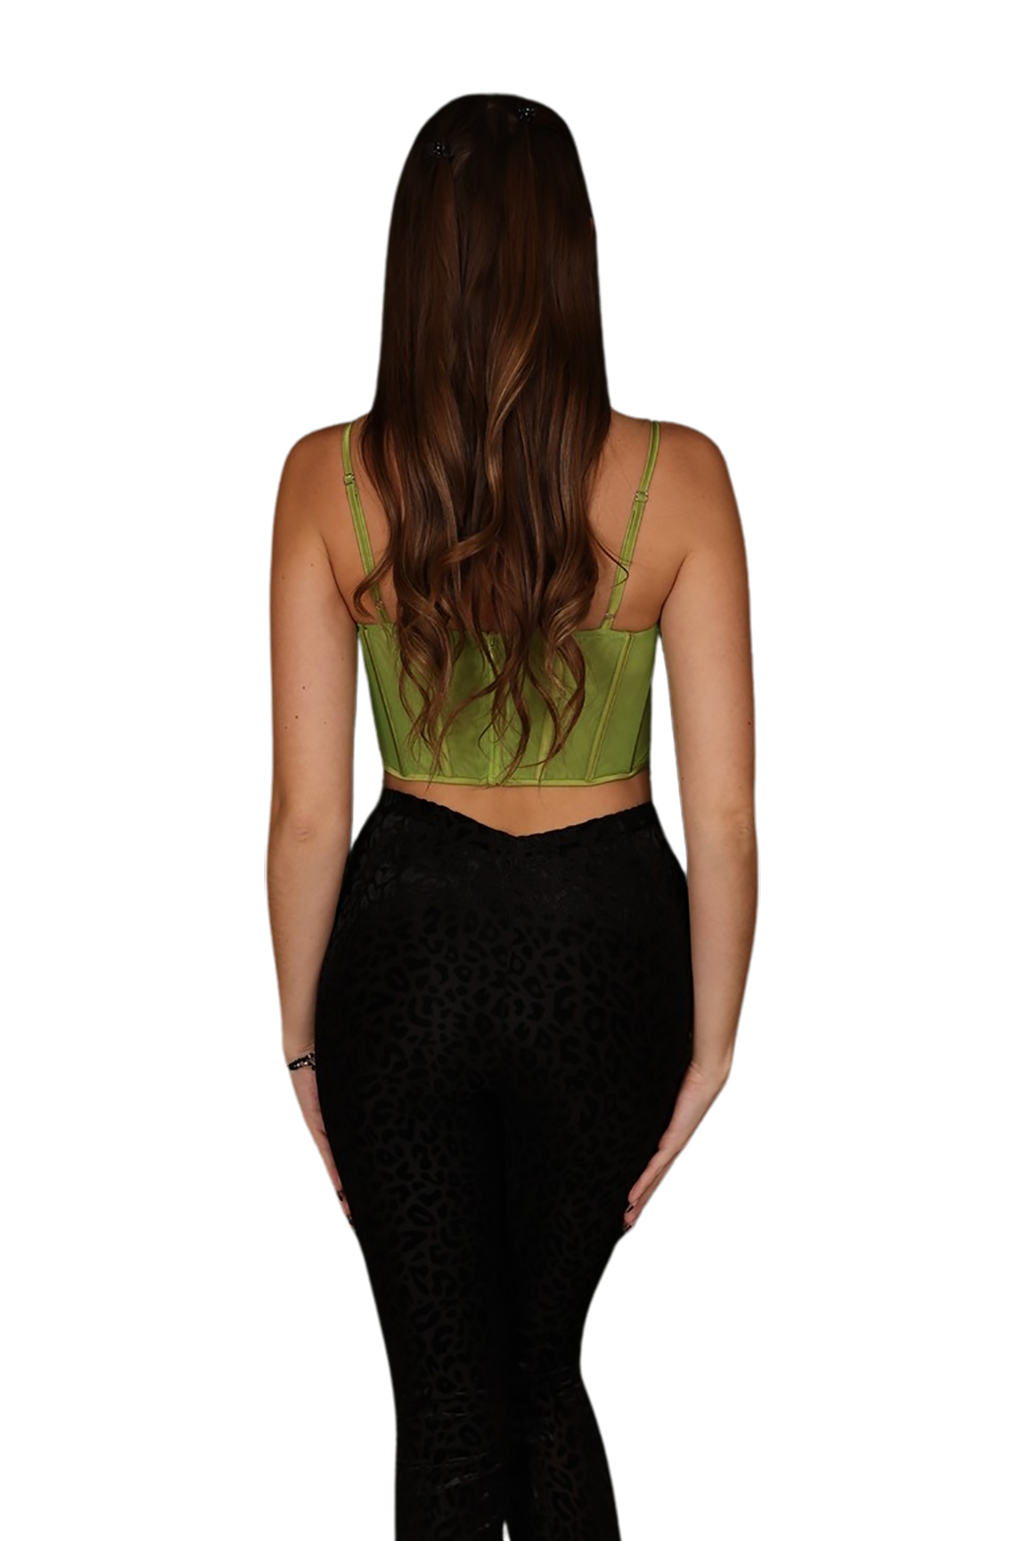 Elegant green satin bustier crop top featuring a v-cut corset and front cutout with sheer bodice